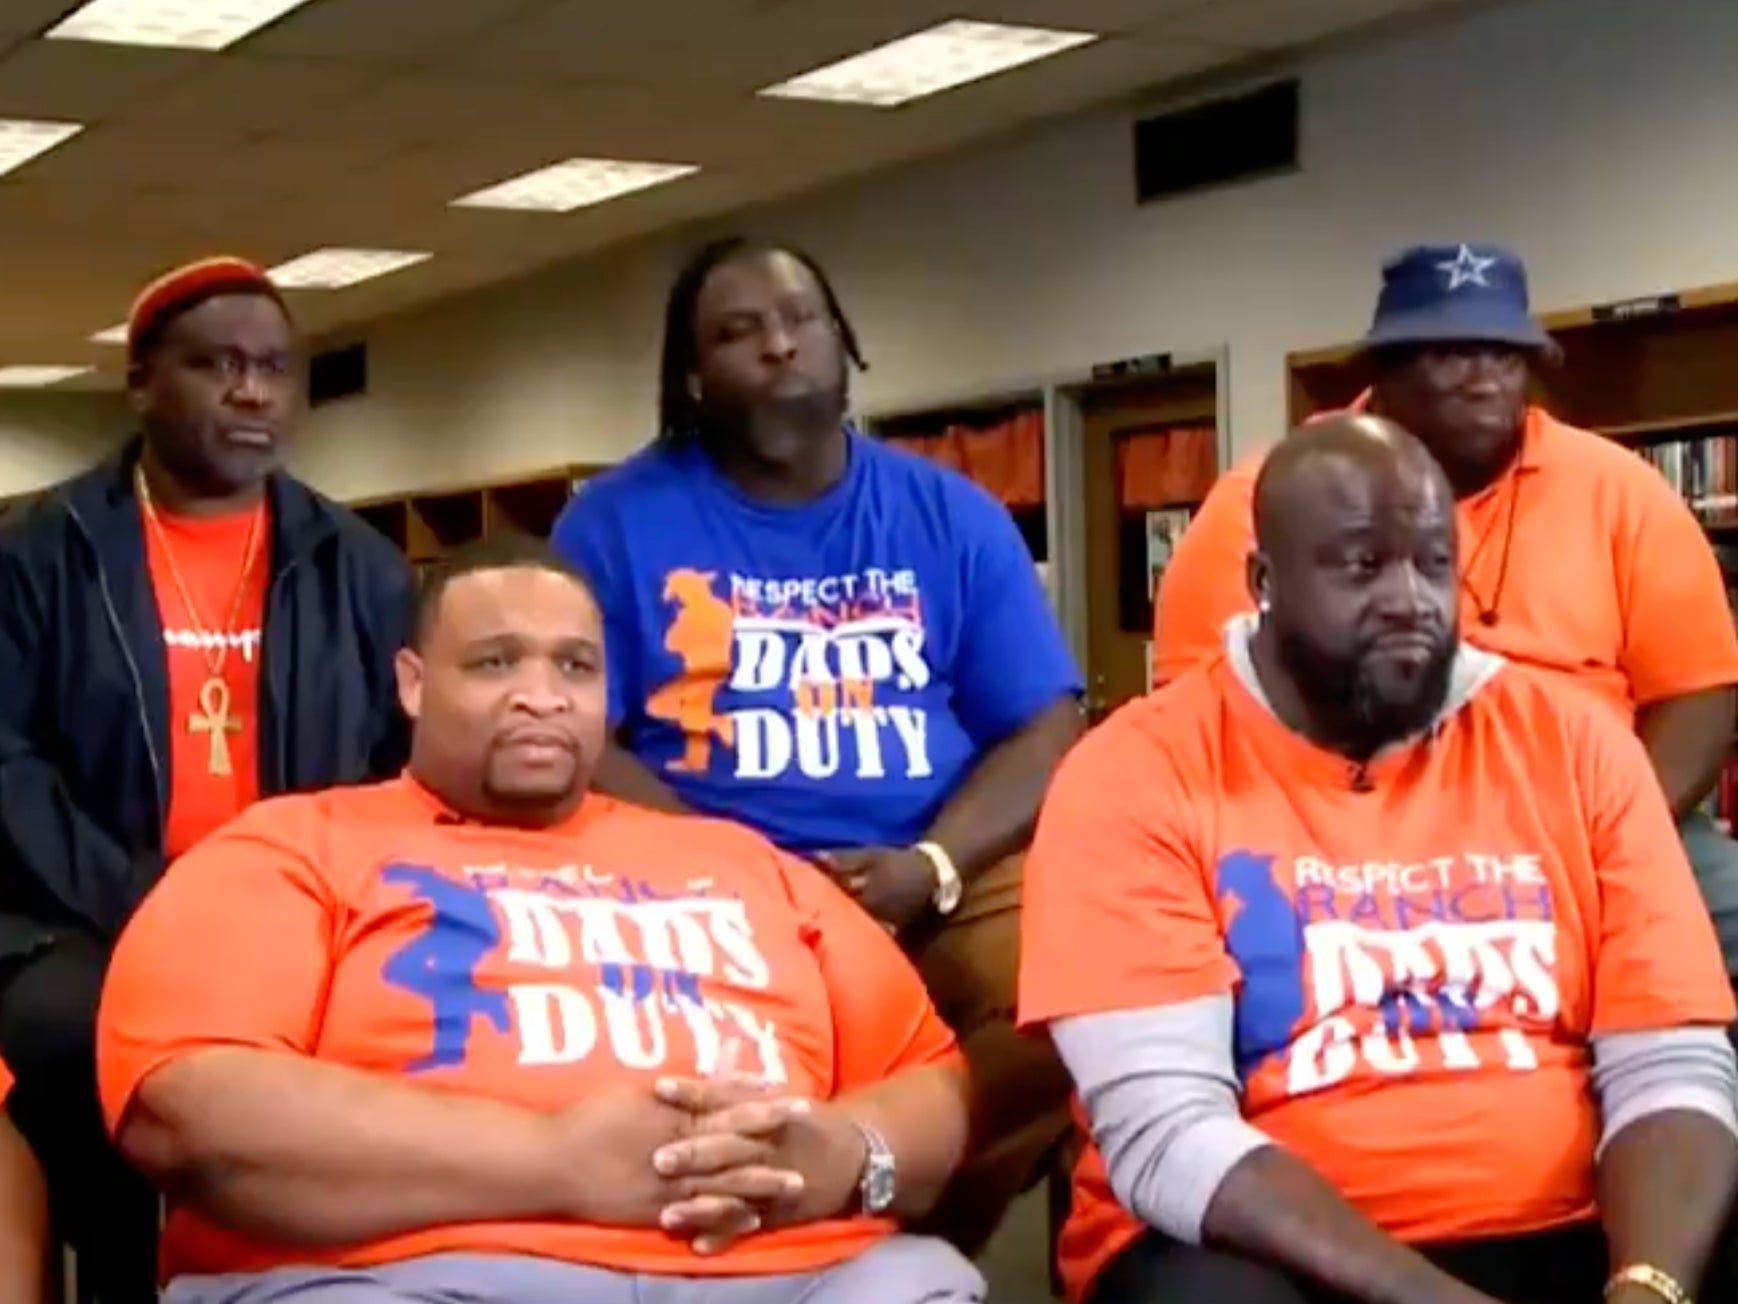 Dads on Duty is a group of fathers spending shifts at a Louisiana high school after a spate of fights